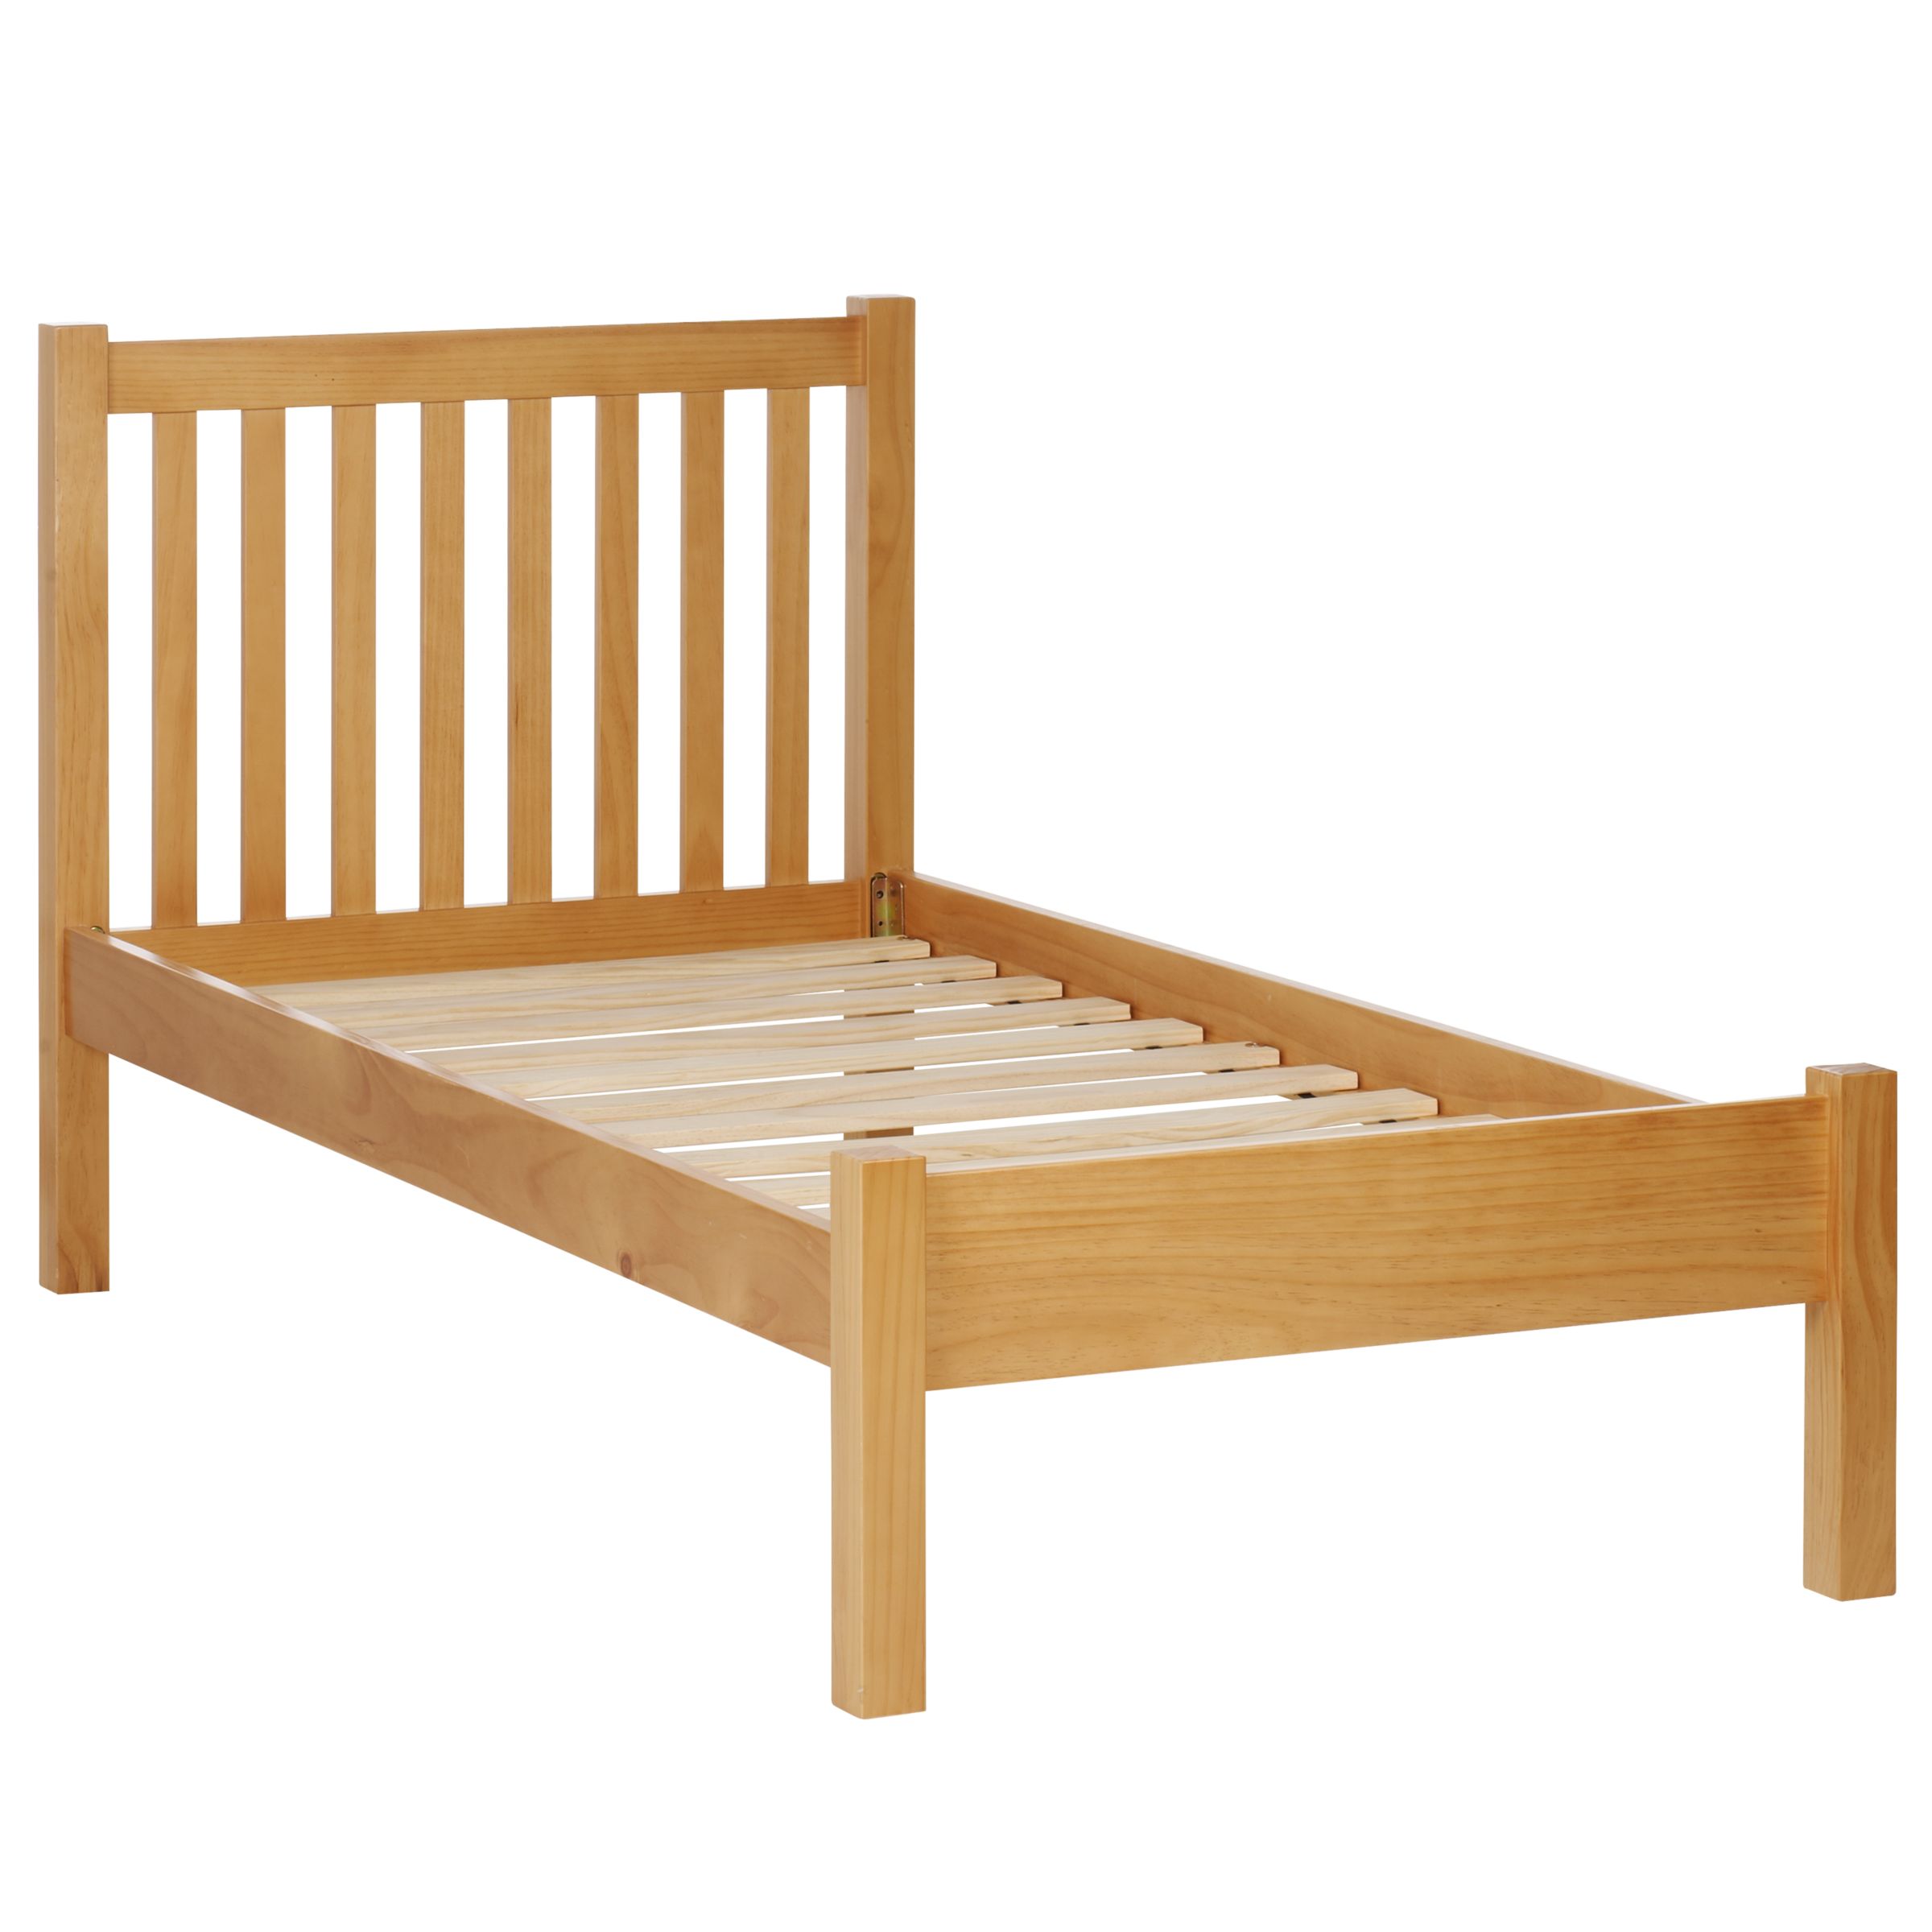 Wilton Bedstead, Pine, Small Double